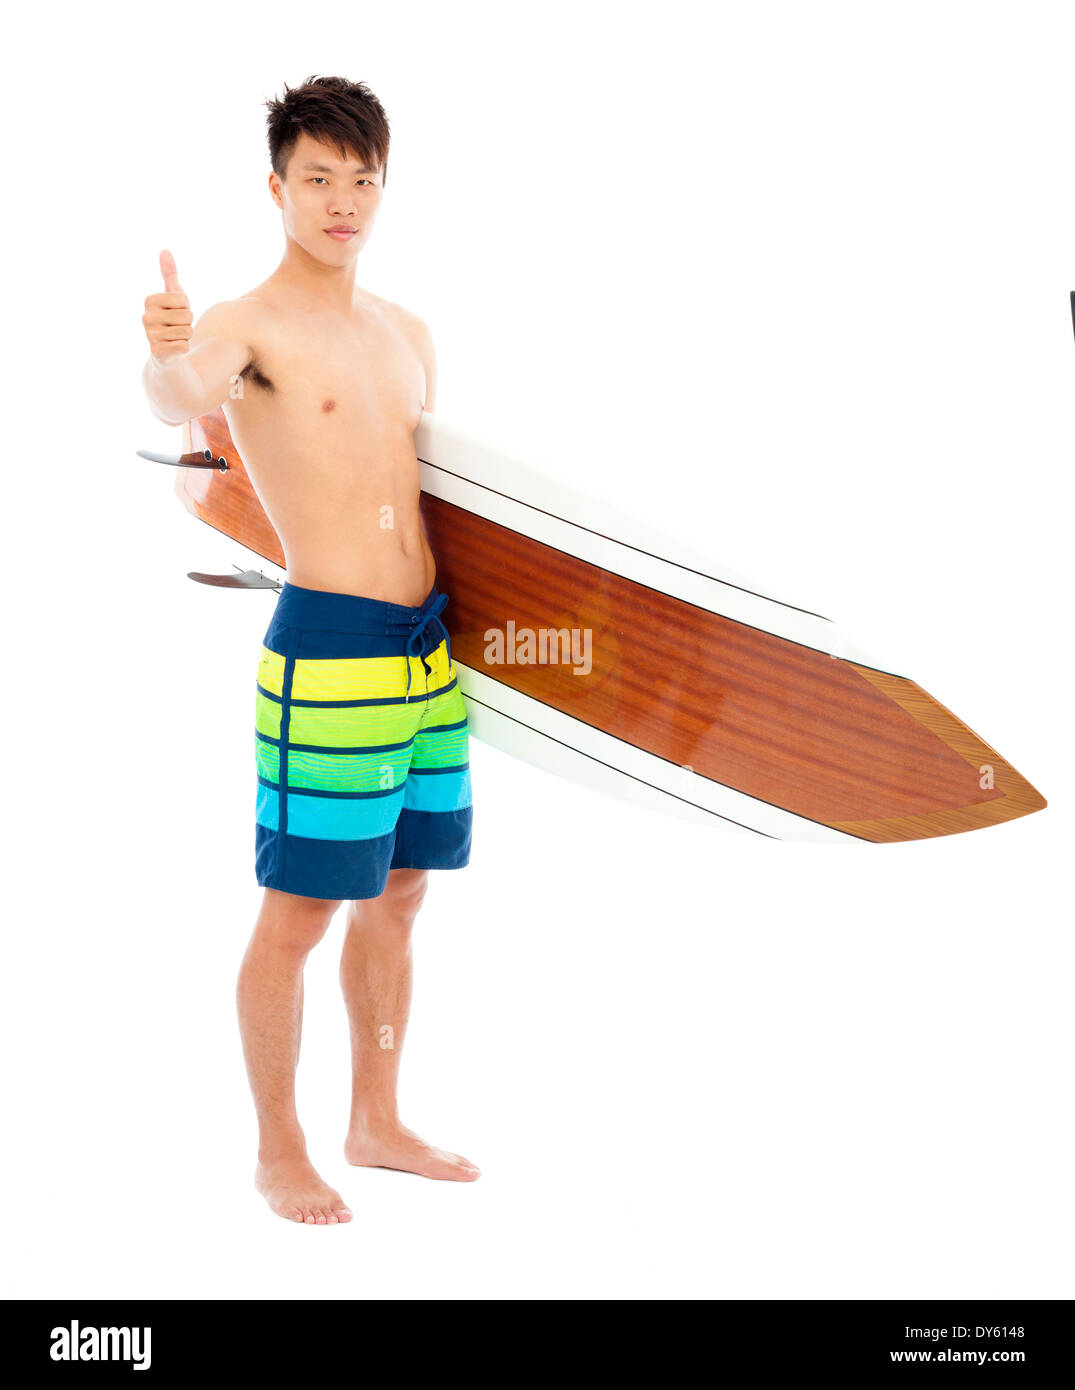 surfer holding a surfboard and thumb up Stock Photo